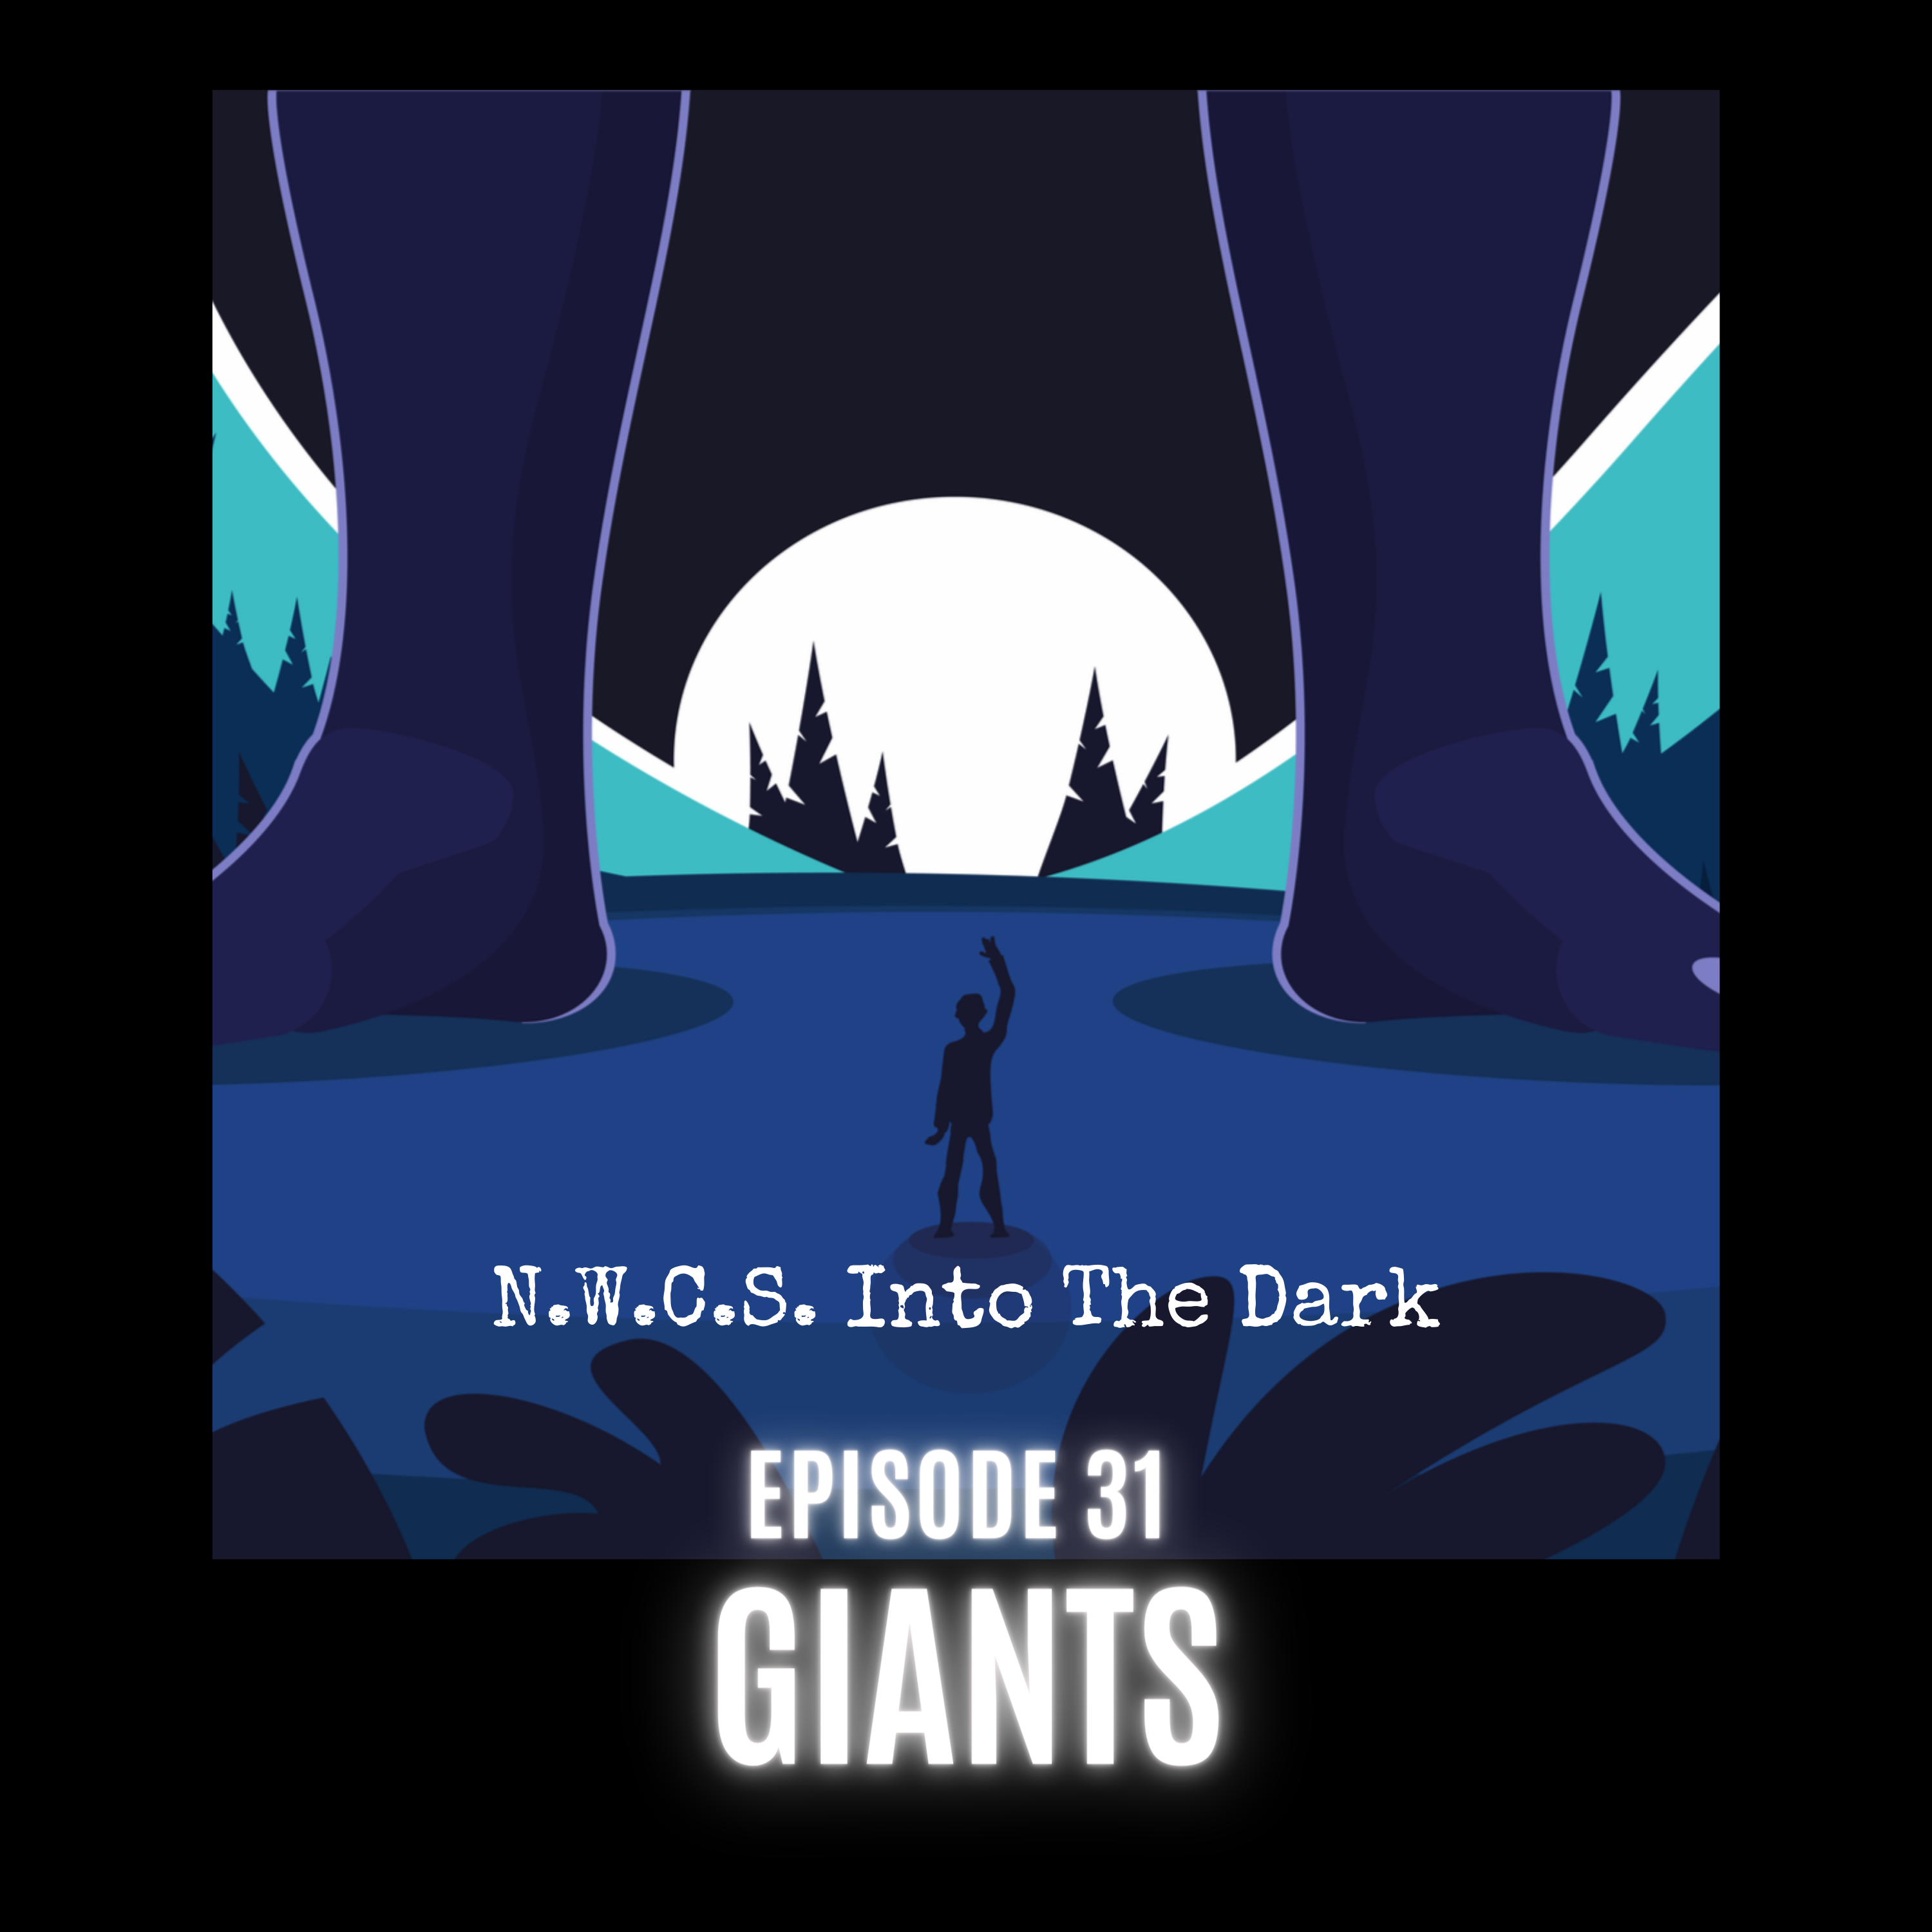 NWCS - Into The Dark - Episode 31 Giants